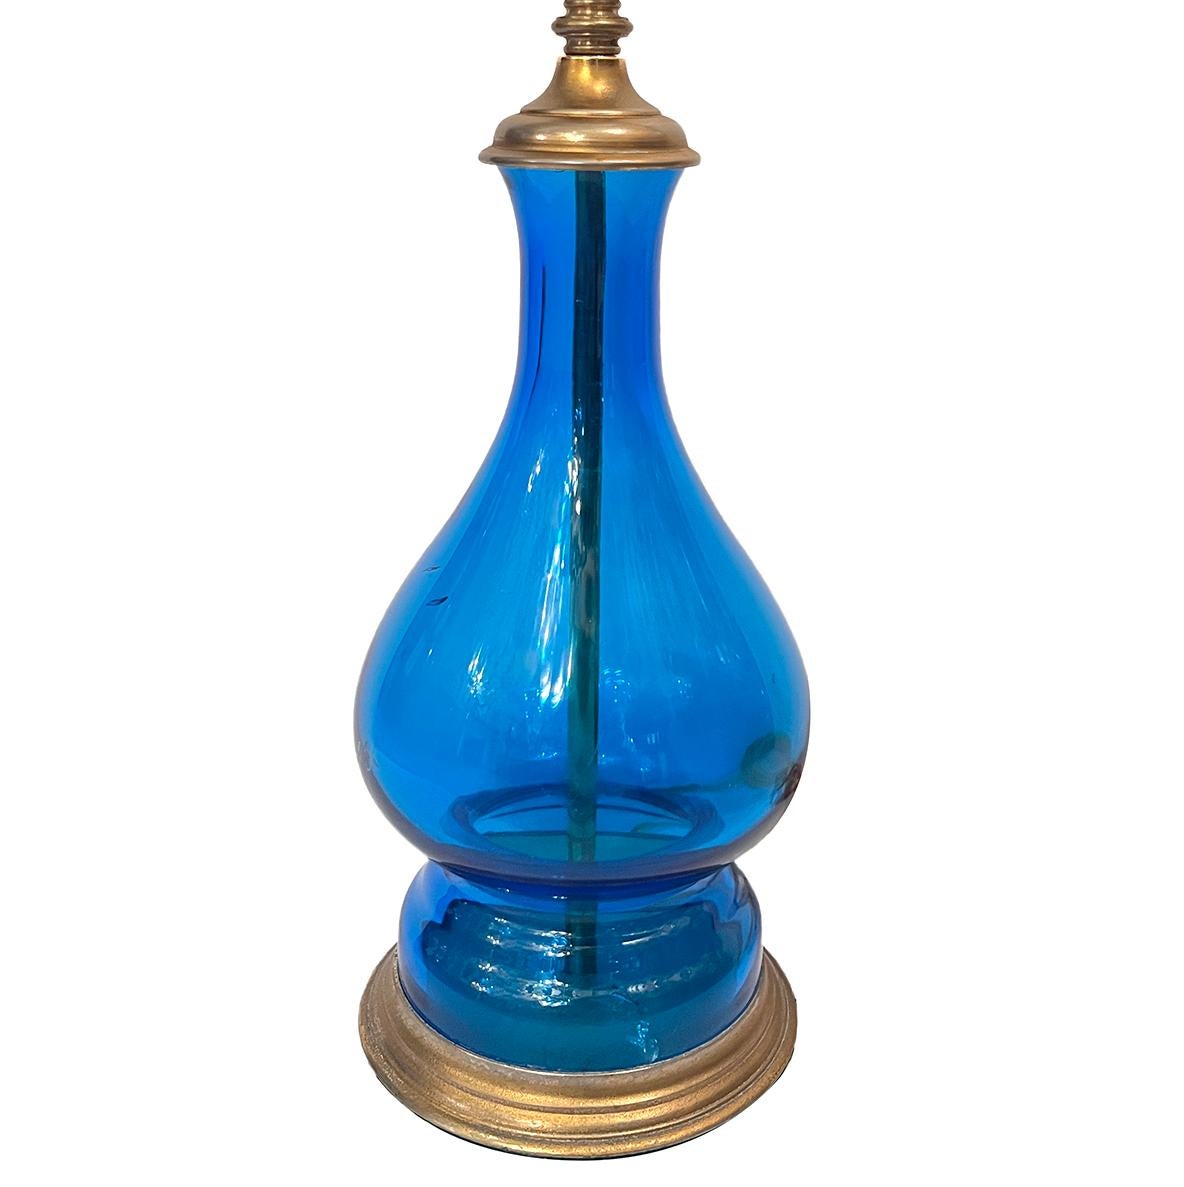 A circa 1950's Italian blown blue glass lamp with brass base.

Measurements:
Height of body: 13.25